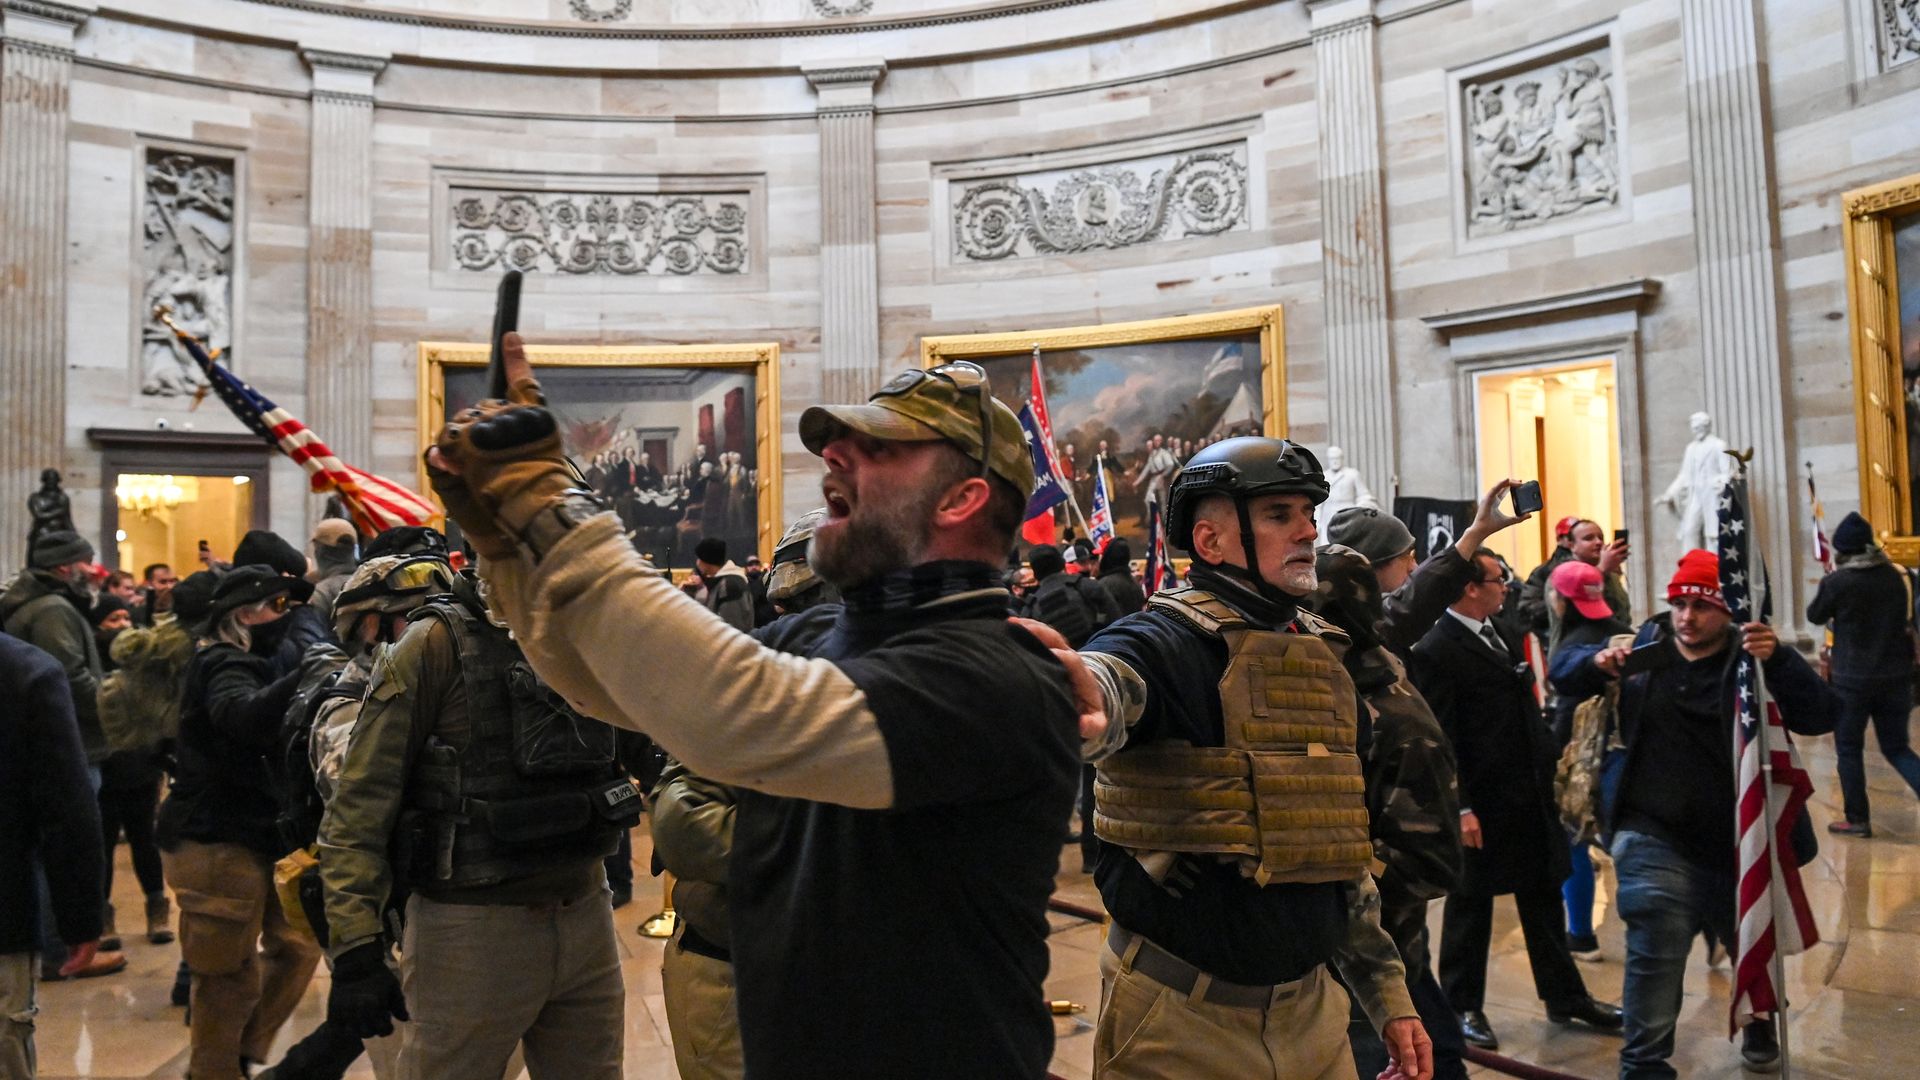 Pro-Trump rioter taking a selfie in the Capitol